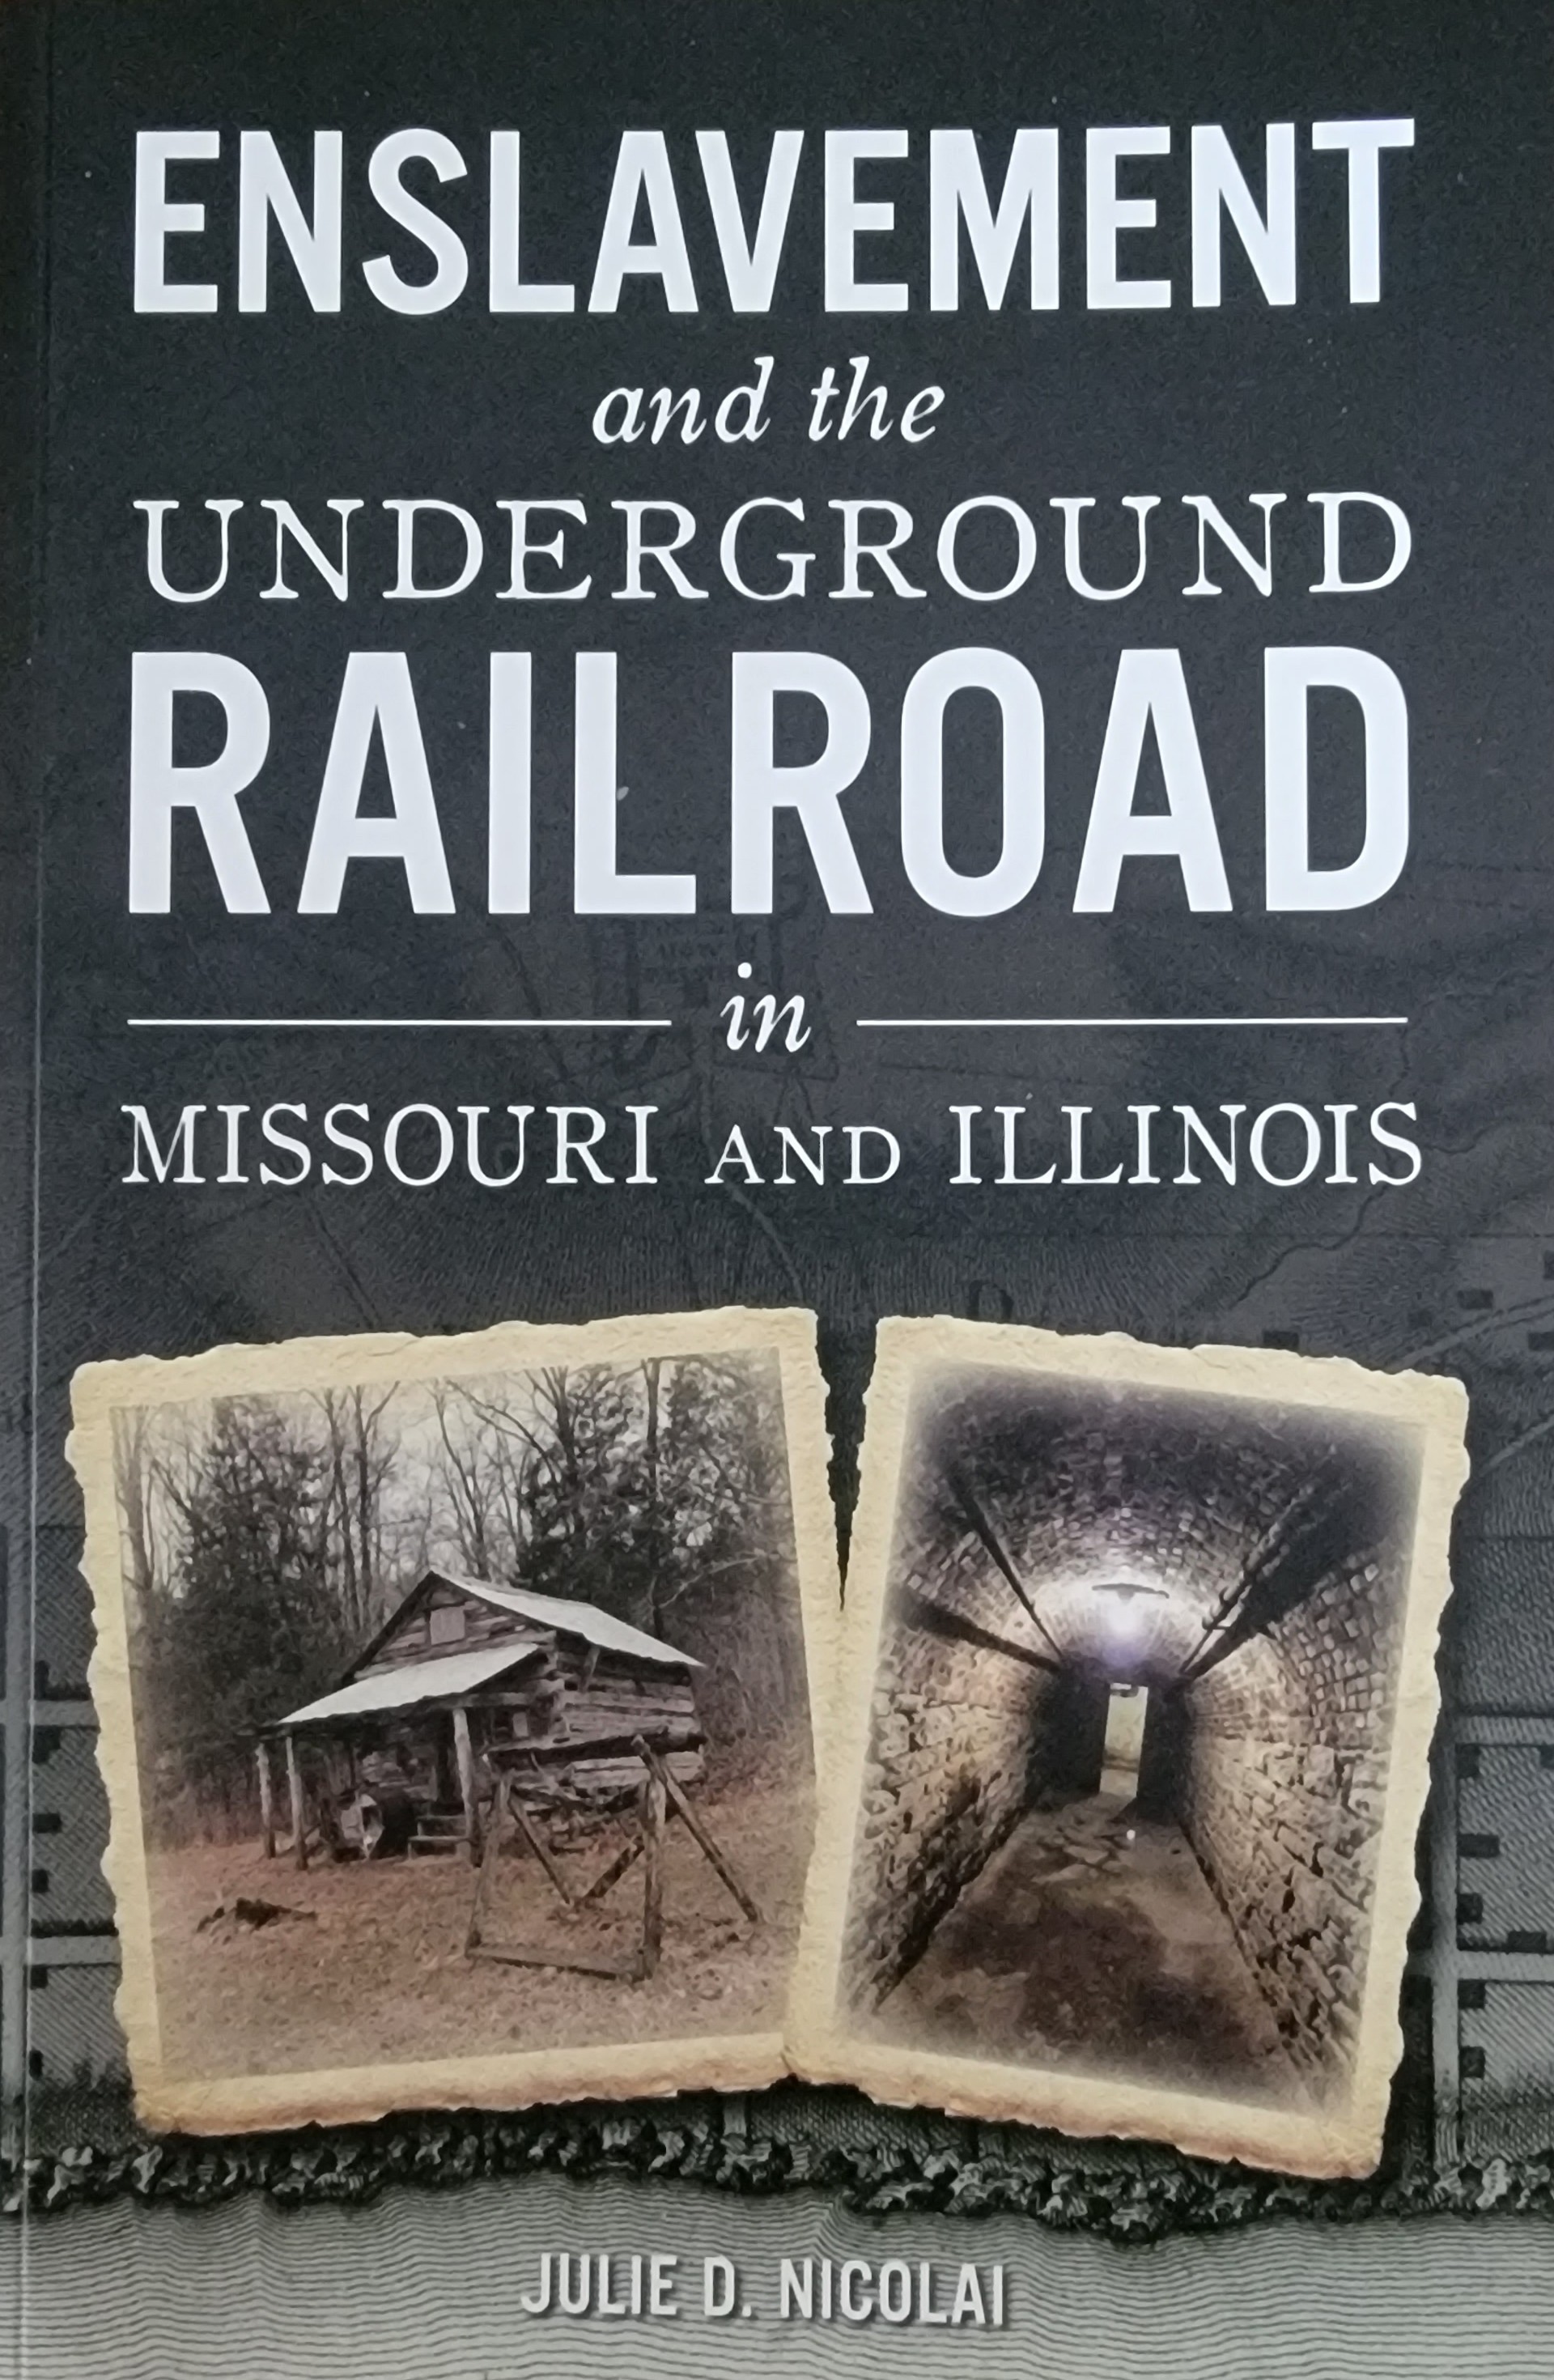 "There Were Lions in the Way: Enslavement & the Underground Railroad in MO & IL"